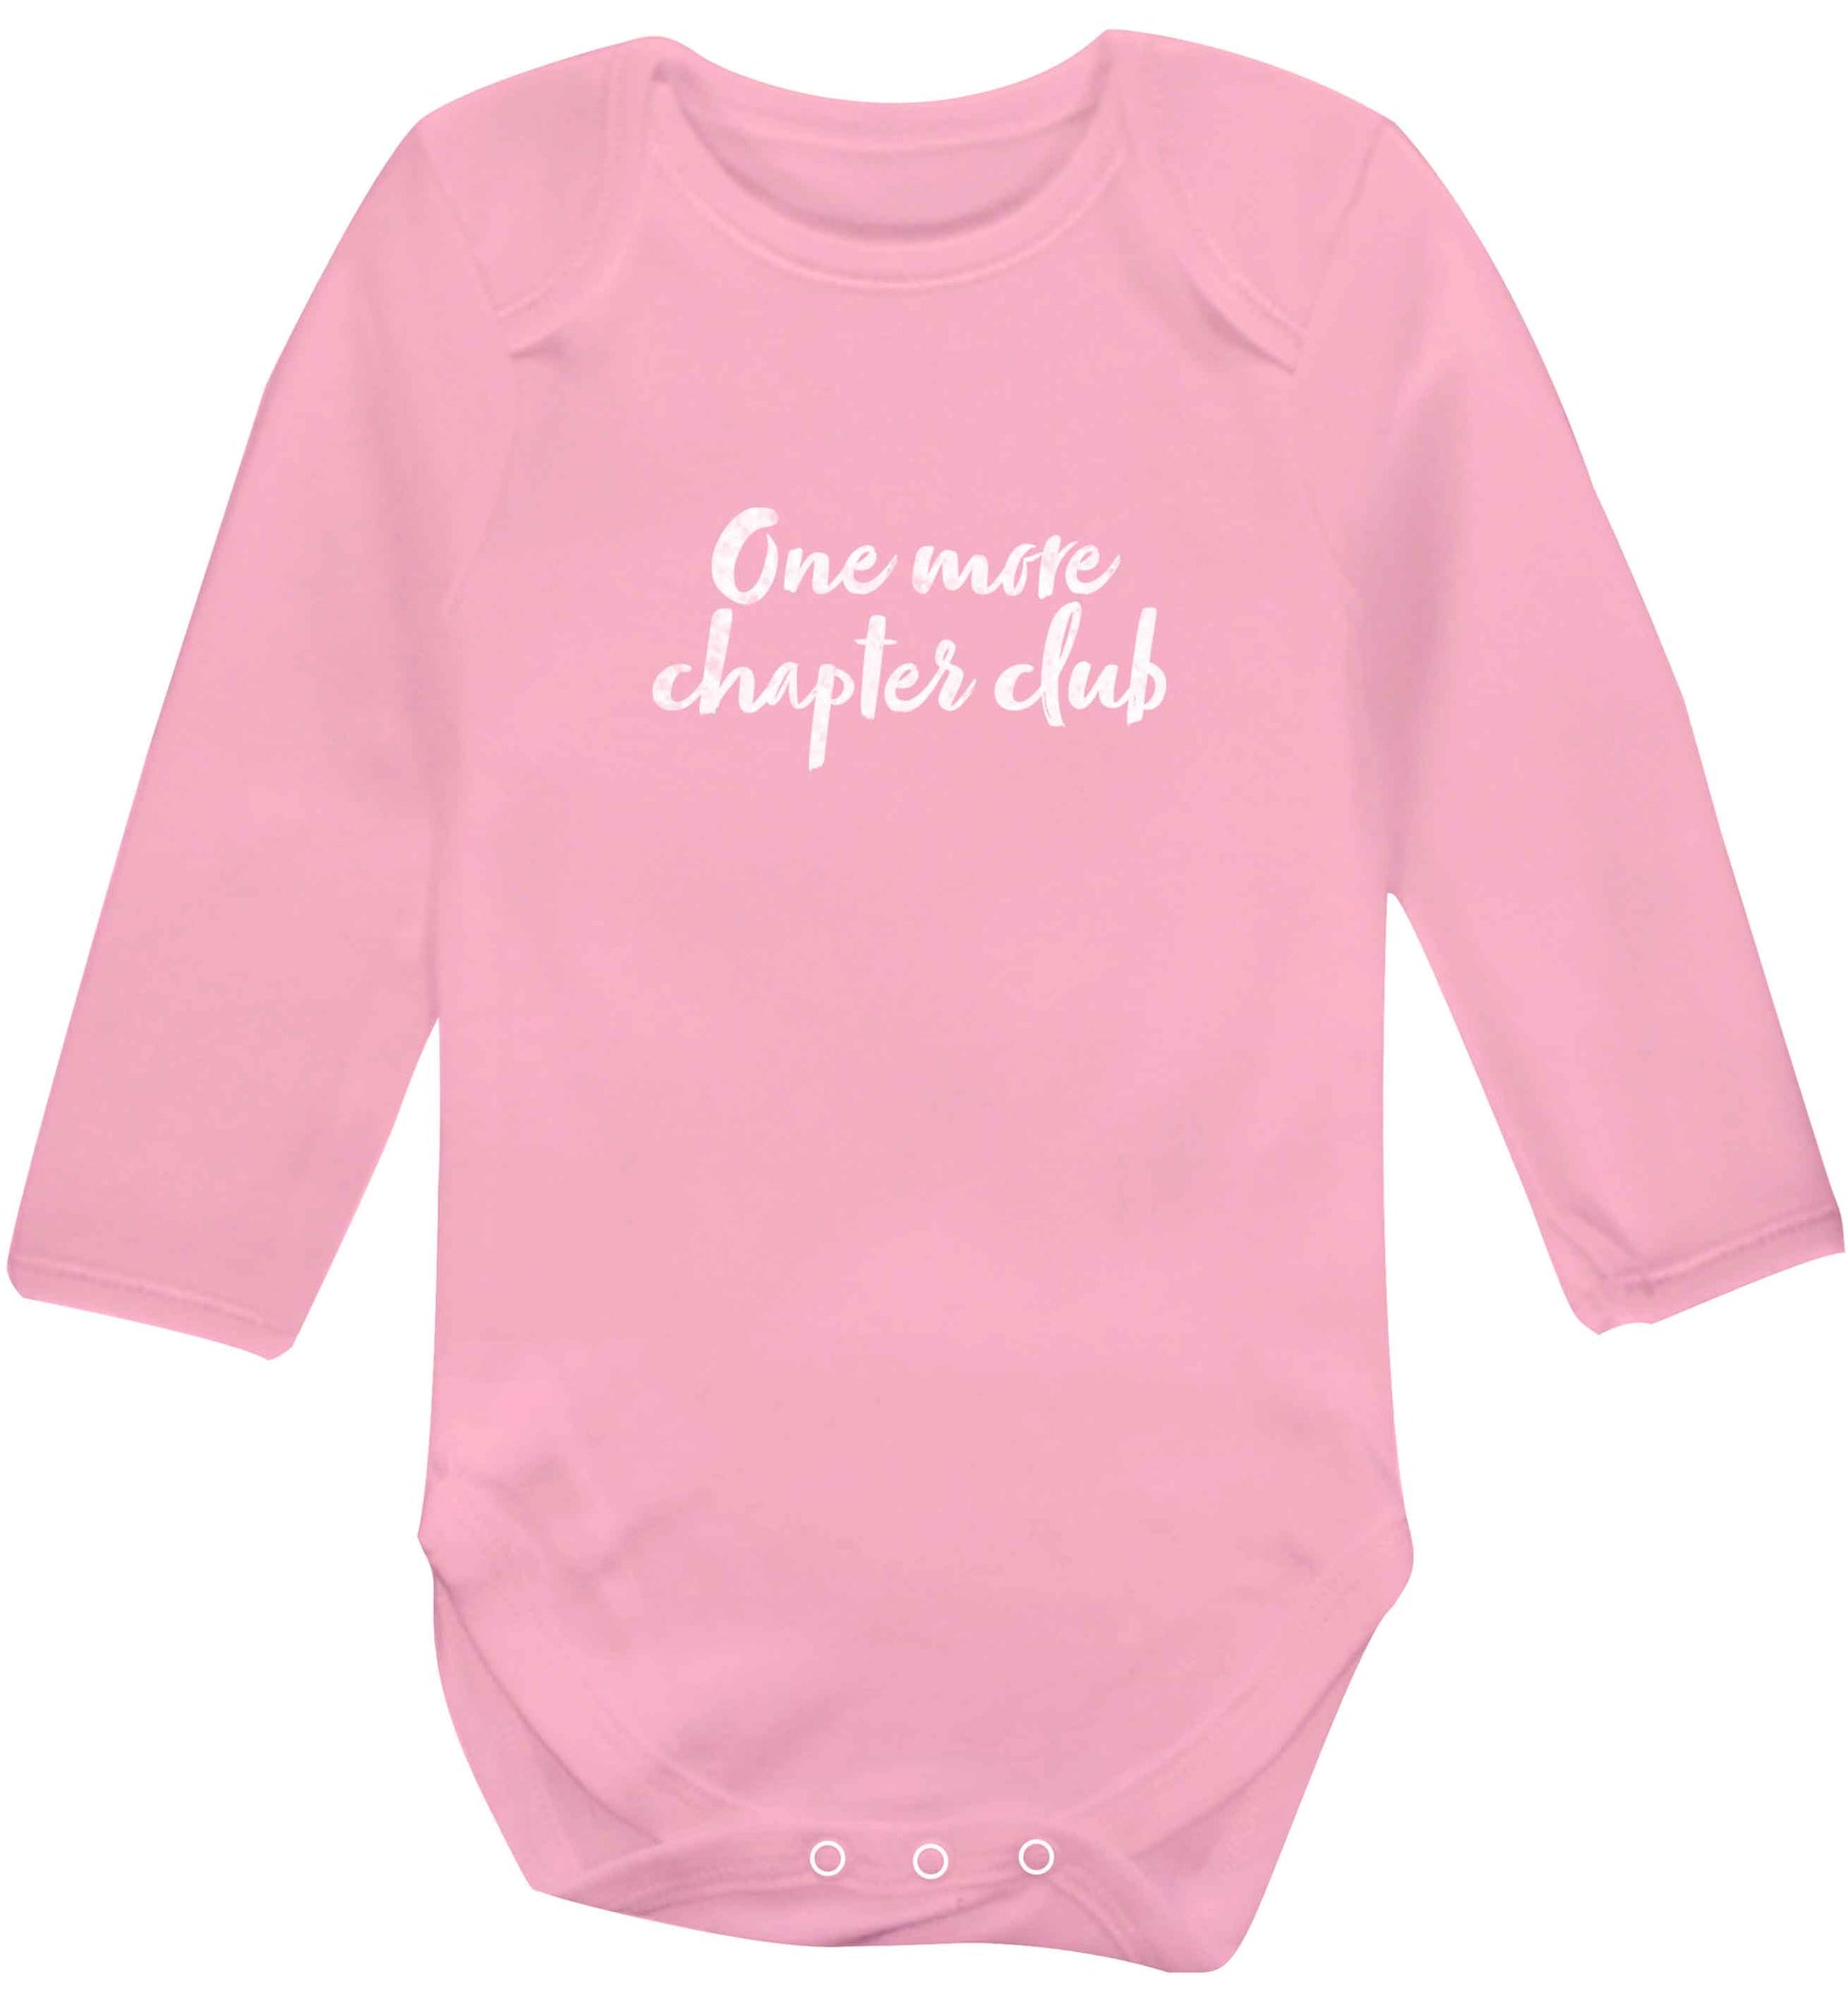 One more chapter club Kit baby vest long sleeved pale pink 6-12 months